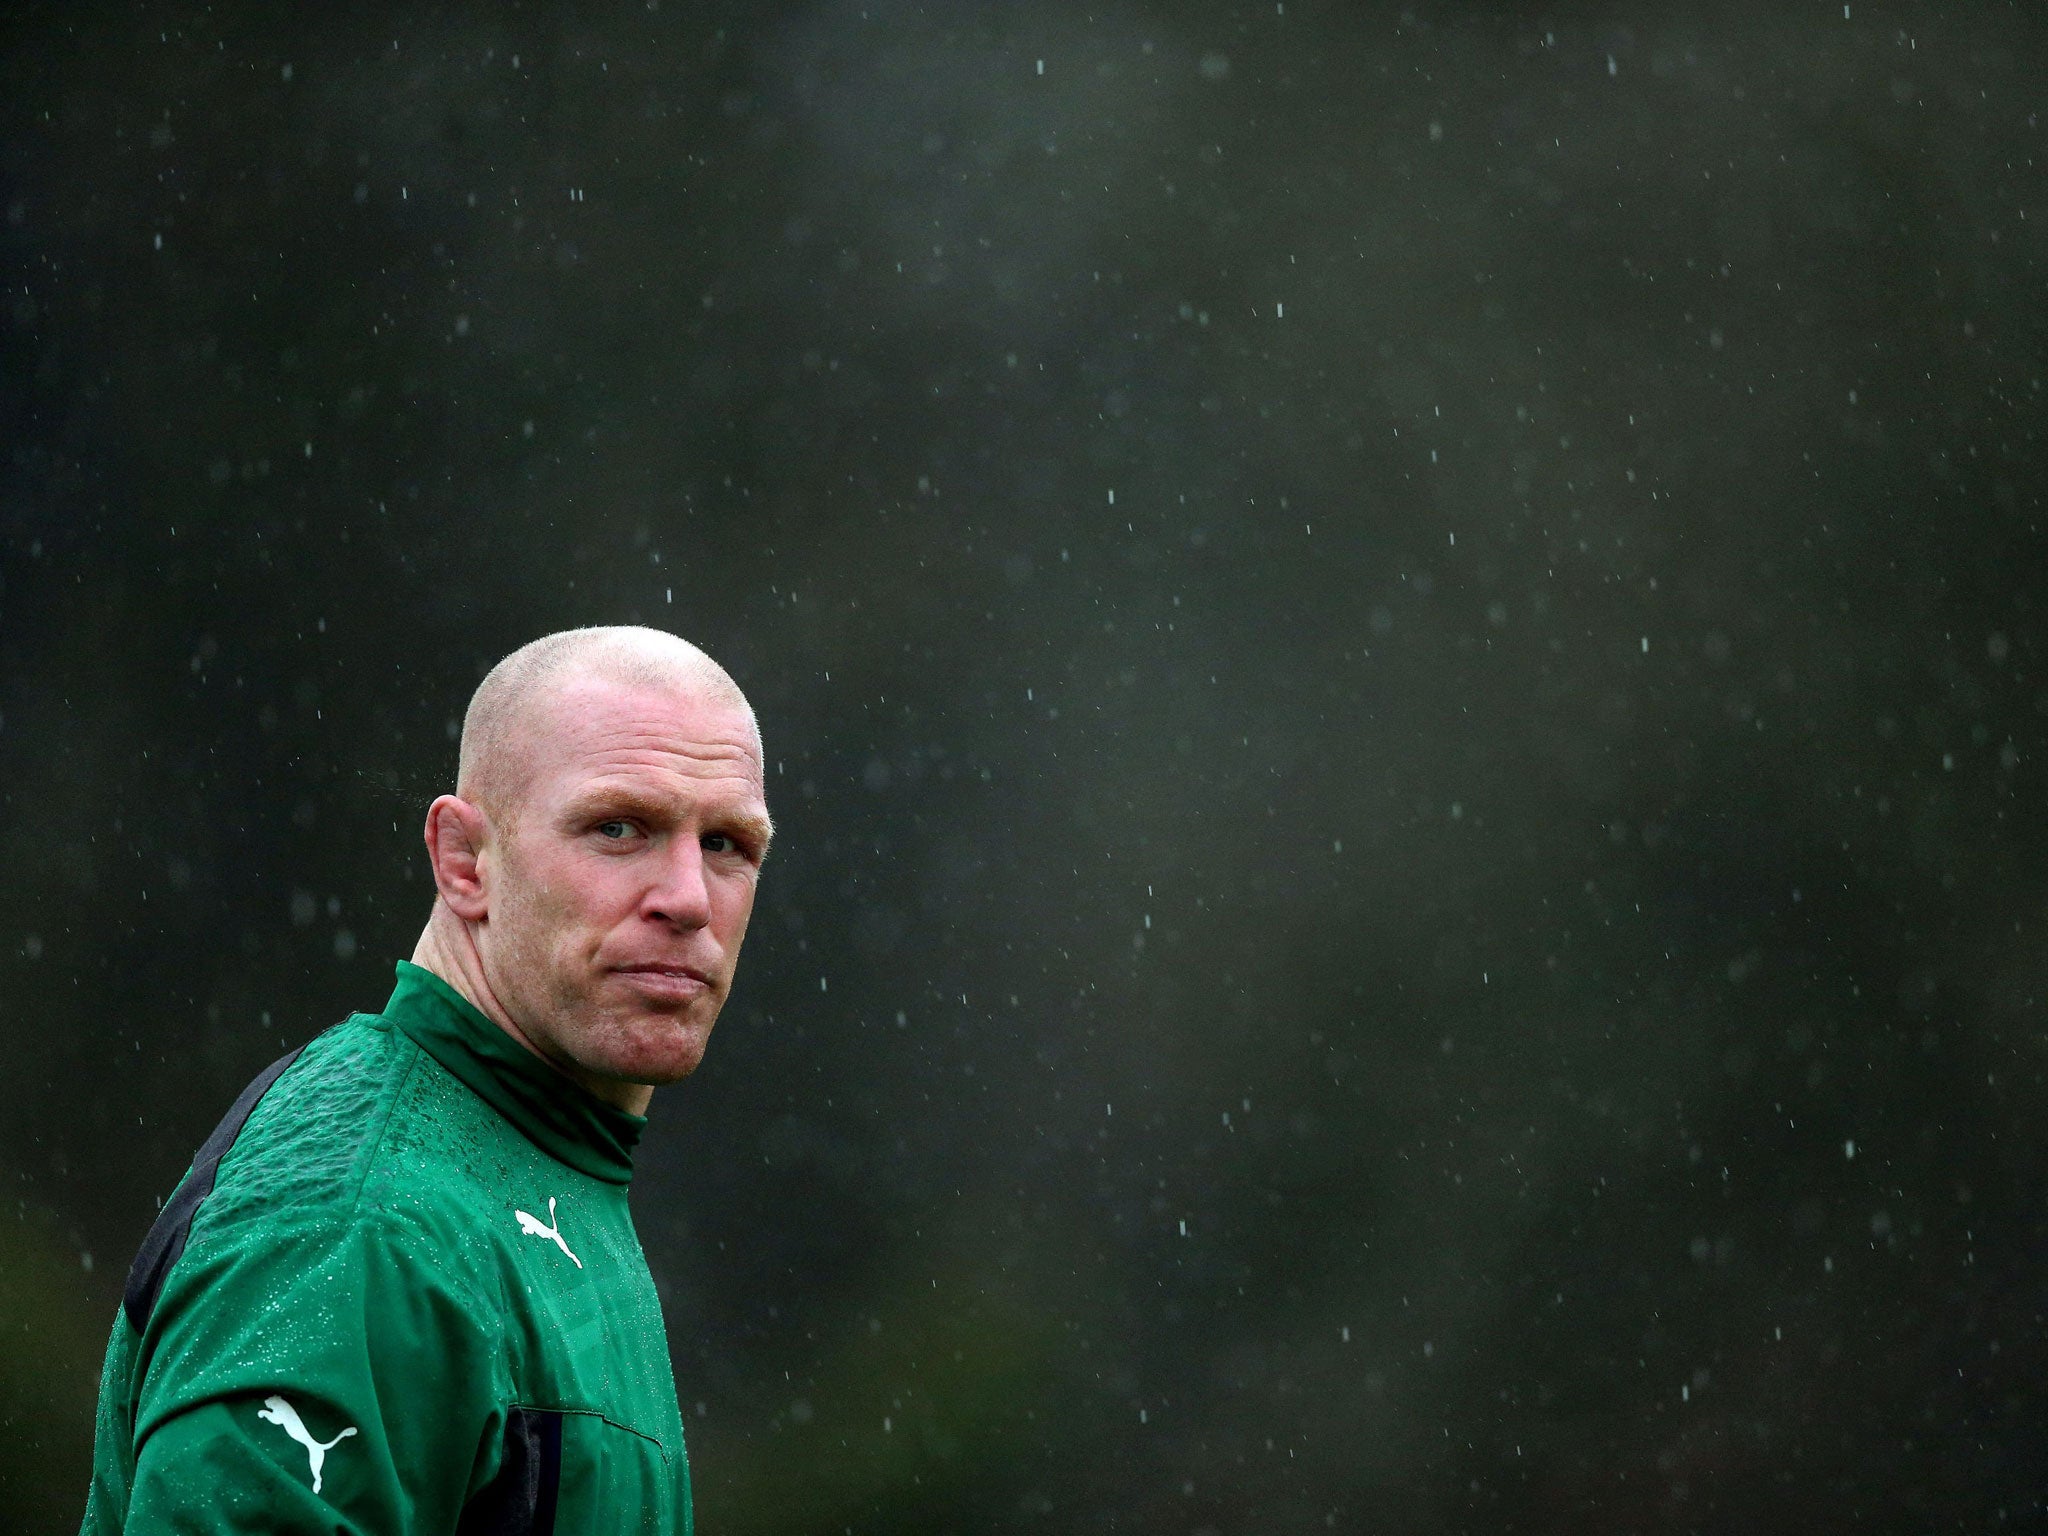 Ireland captain Paul O’Connell will face Wales tomorrow after missing the first Six Nations match